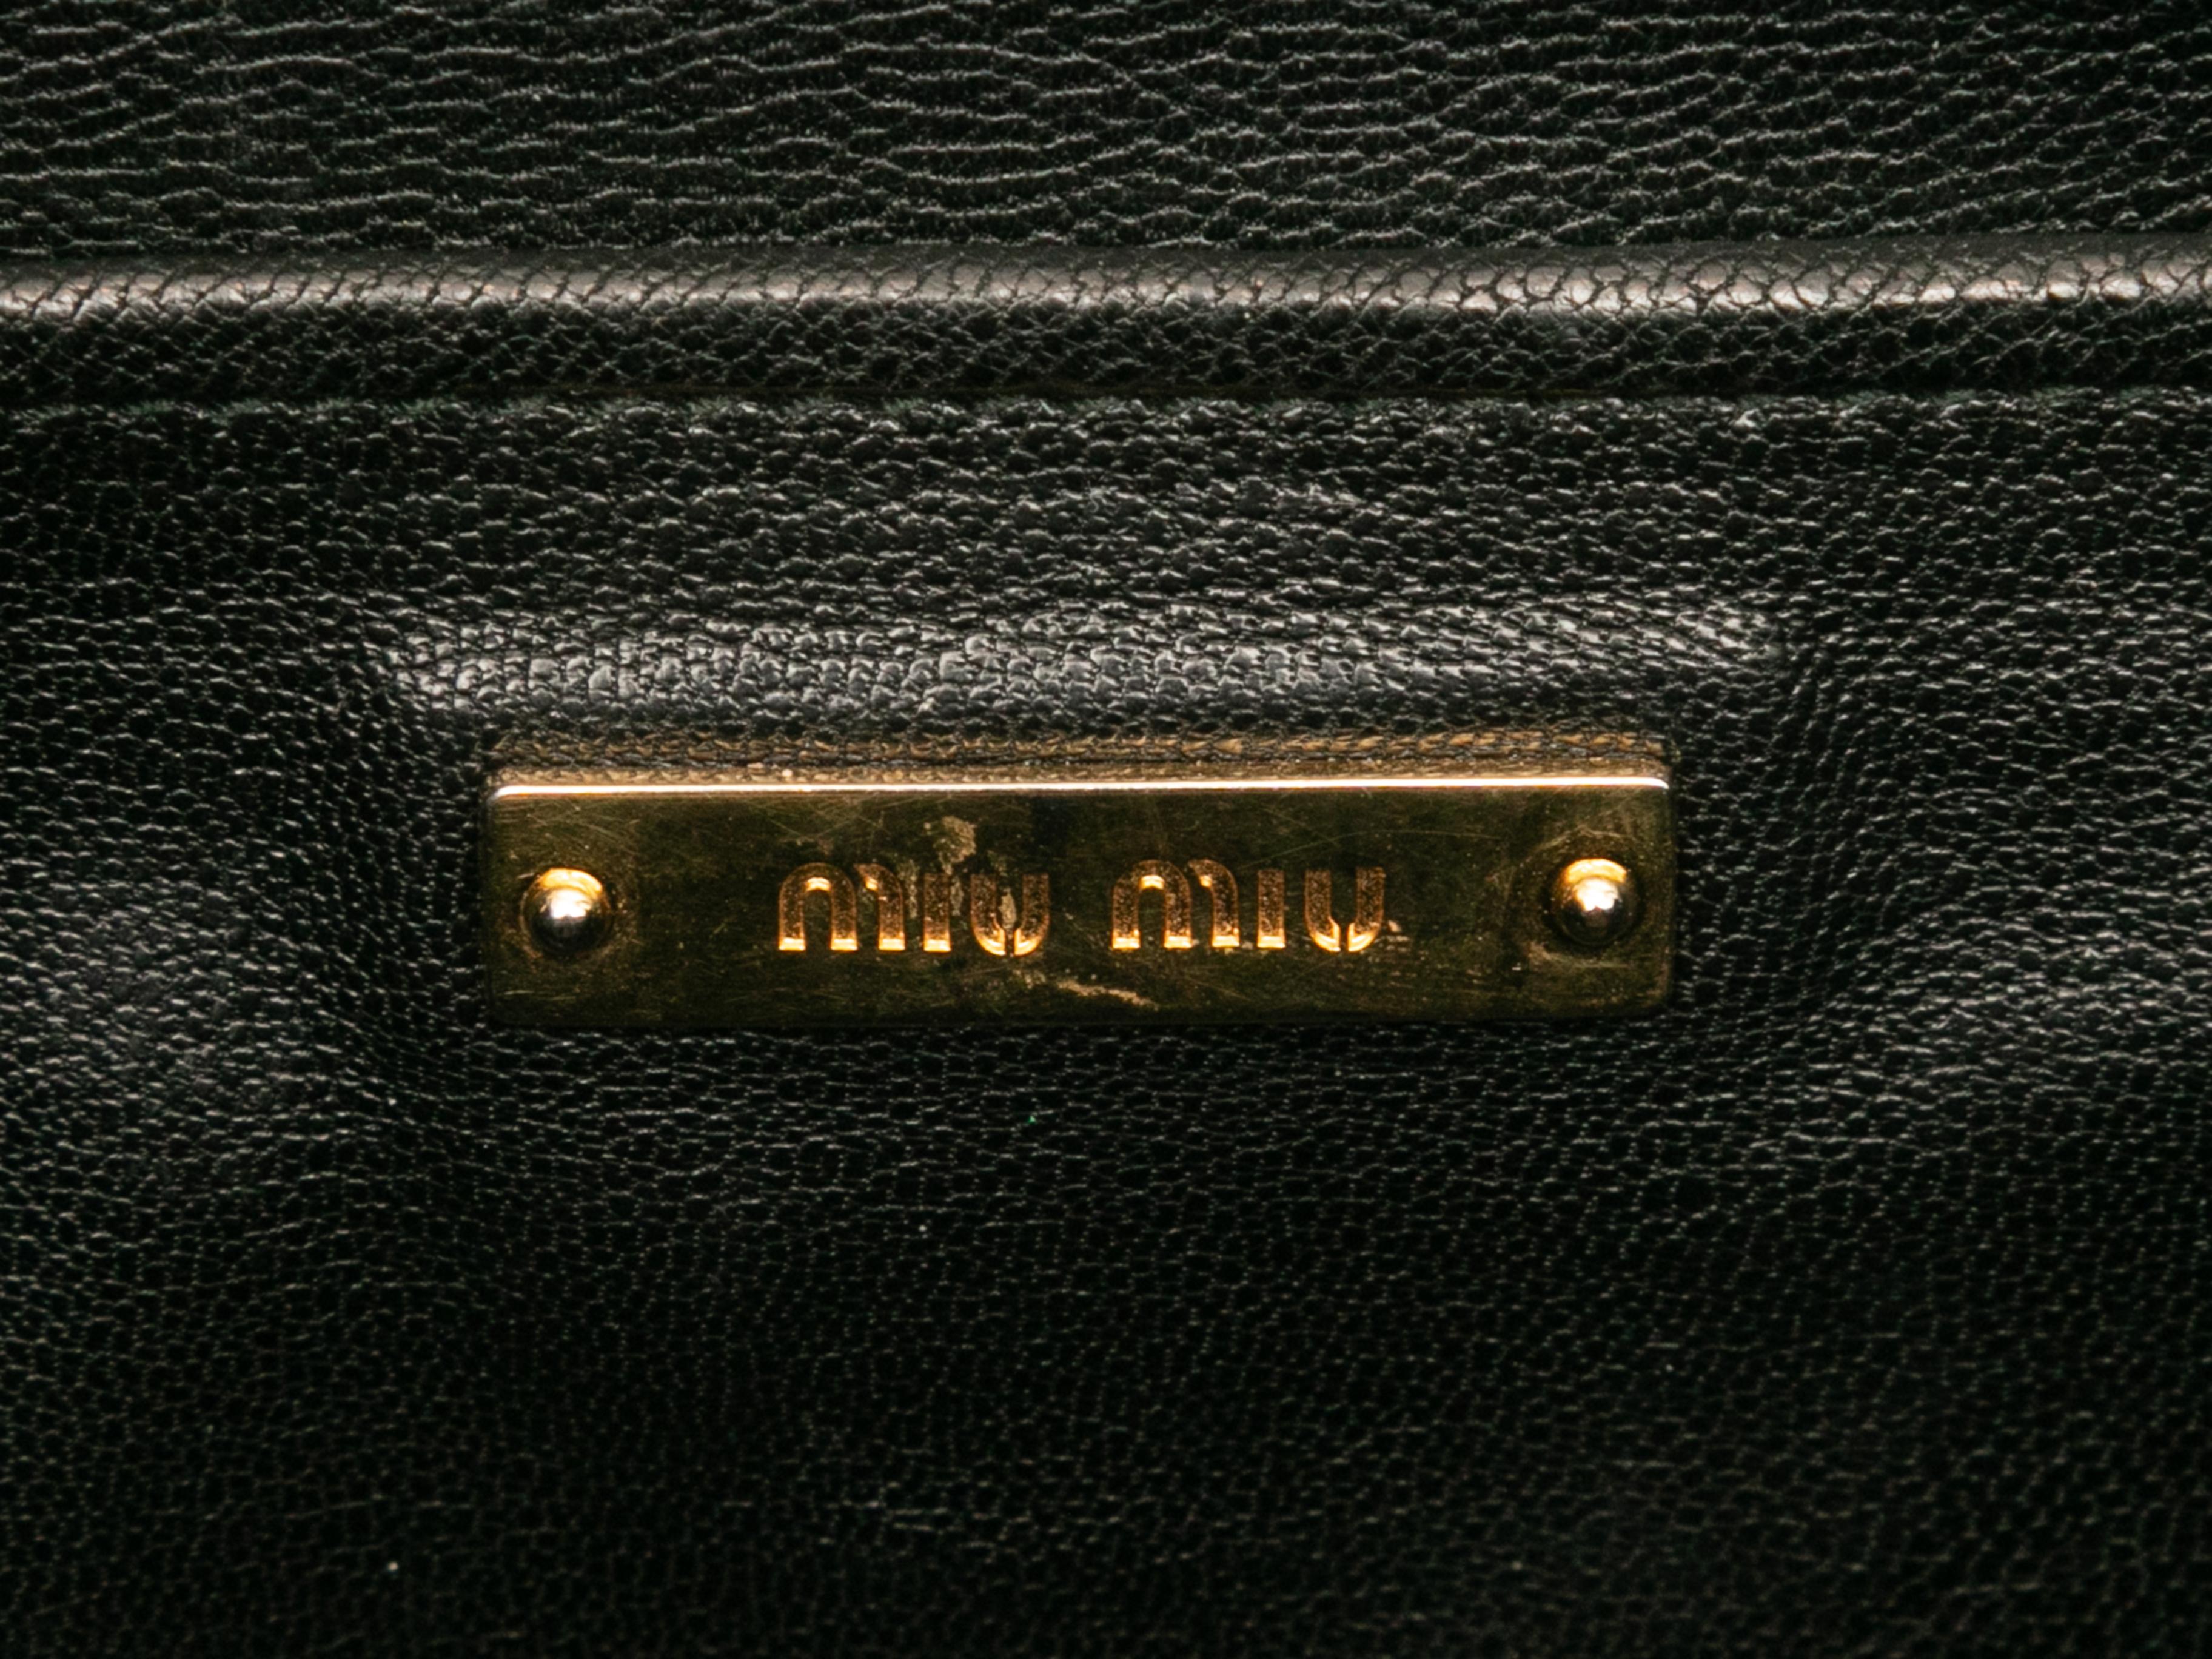 Black Miu Miu Leather Moto Bag. This bag features a leather body, gold-tone hardware, dual front zip closure pockets, an exterior back pocket, dual rolled top handles, an optional shoulder strap, and a top zip closure. 17